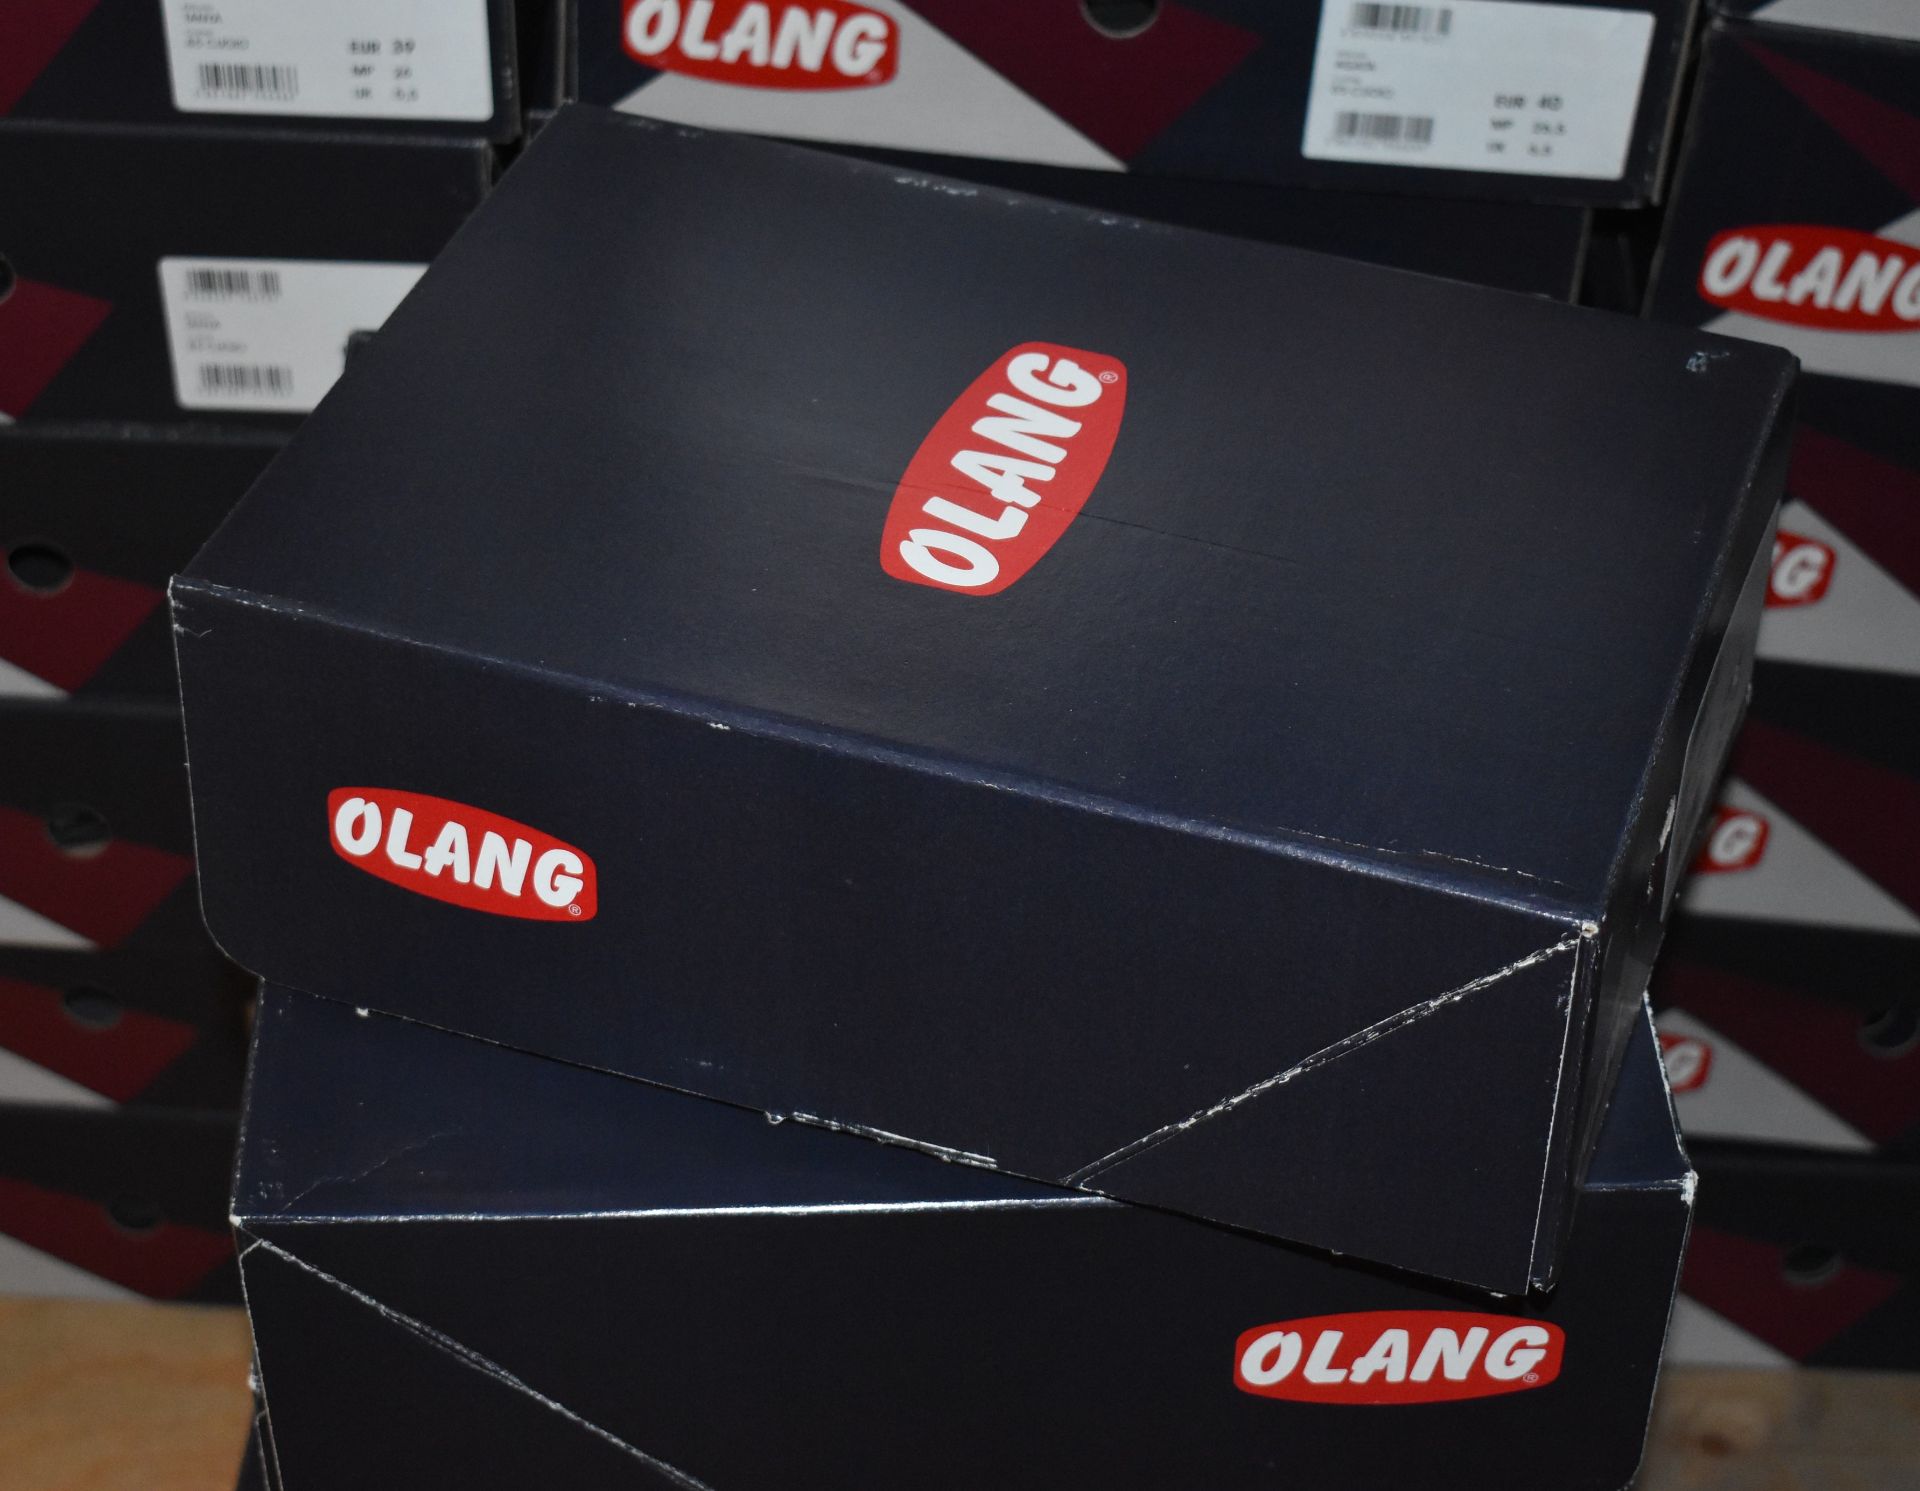 1 x Pair of Designer Olang Merano 82 Blu Women's Winter Boots - Euro Size 41 - Brand New Boxed Stock - Image 4 of 4